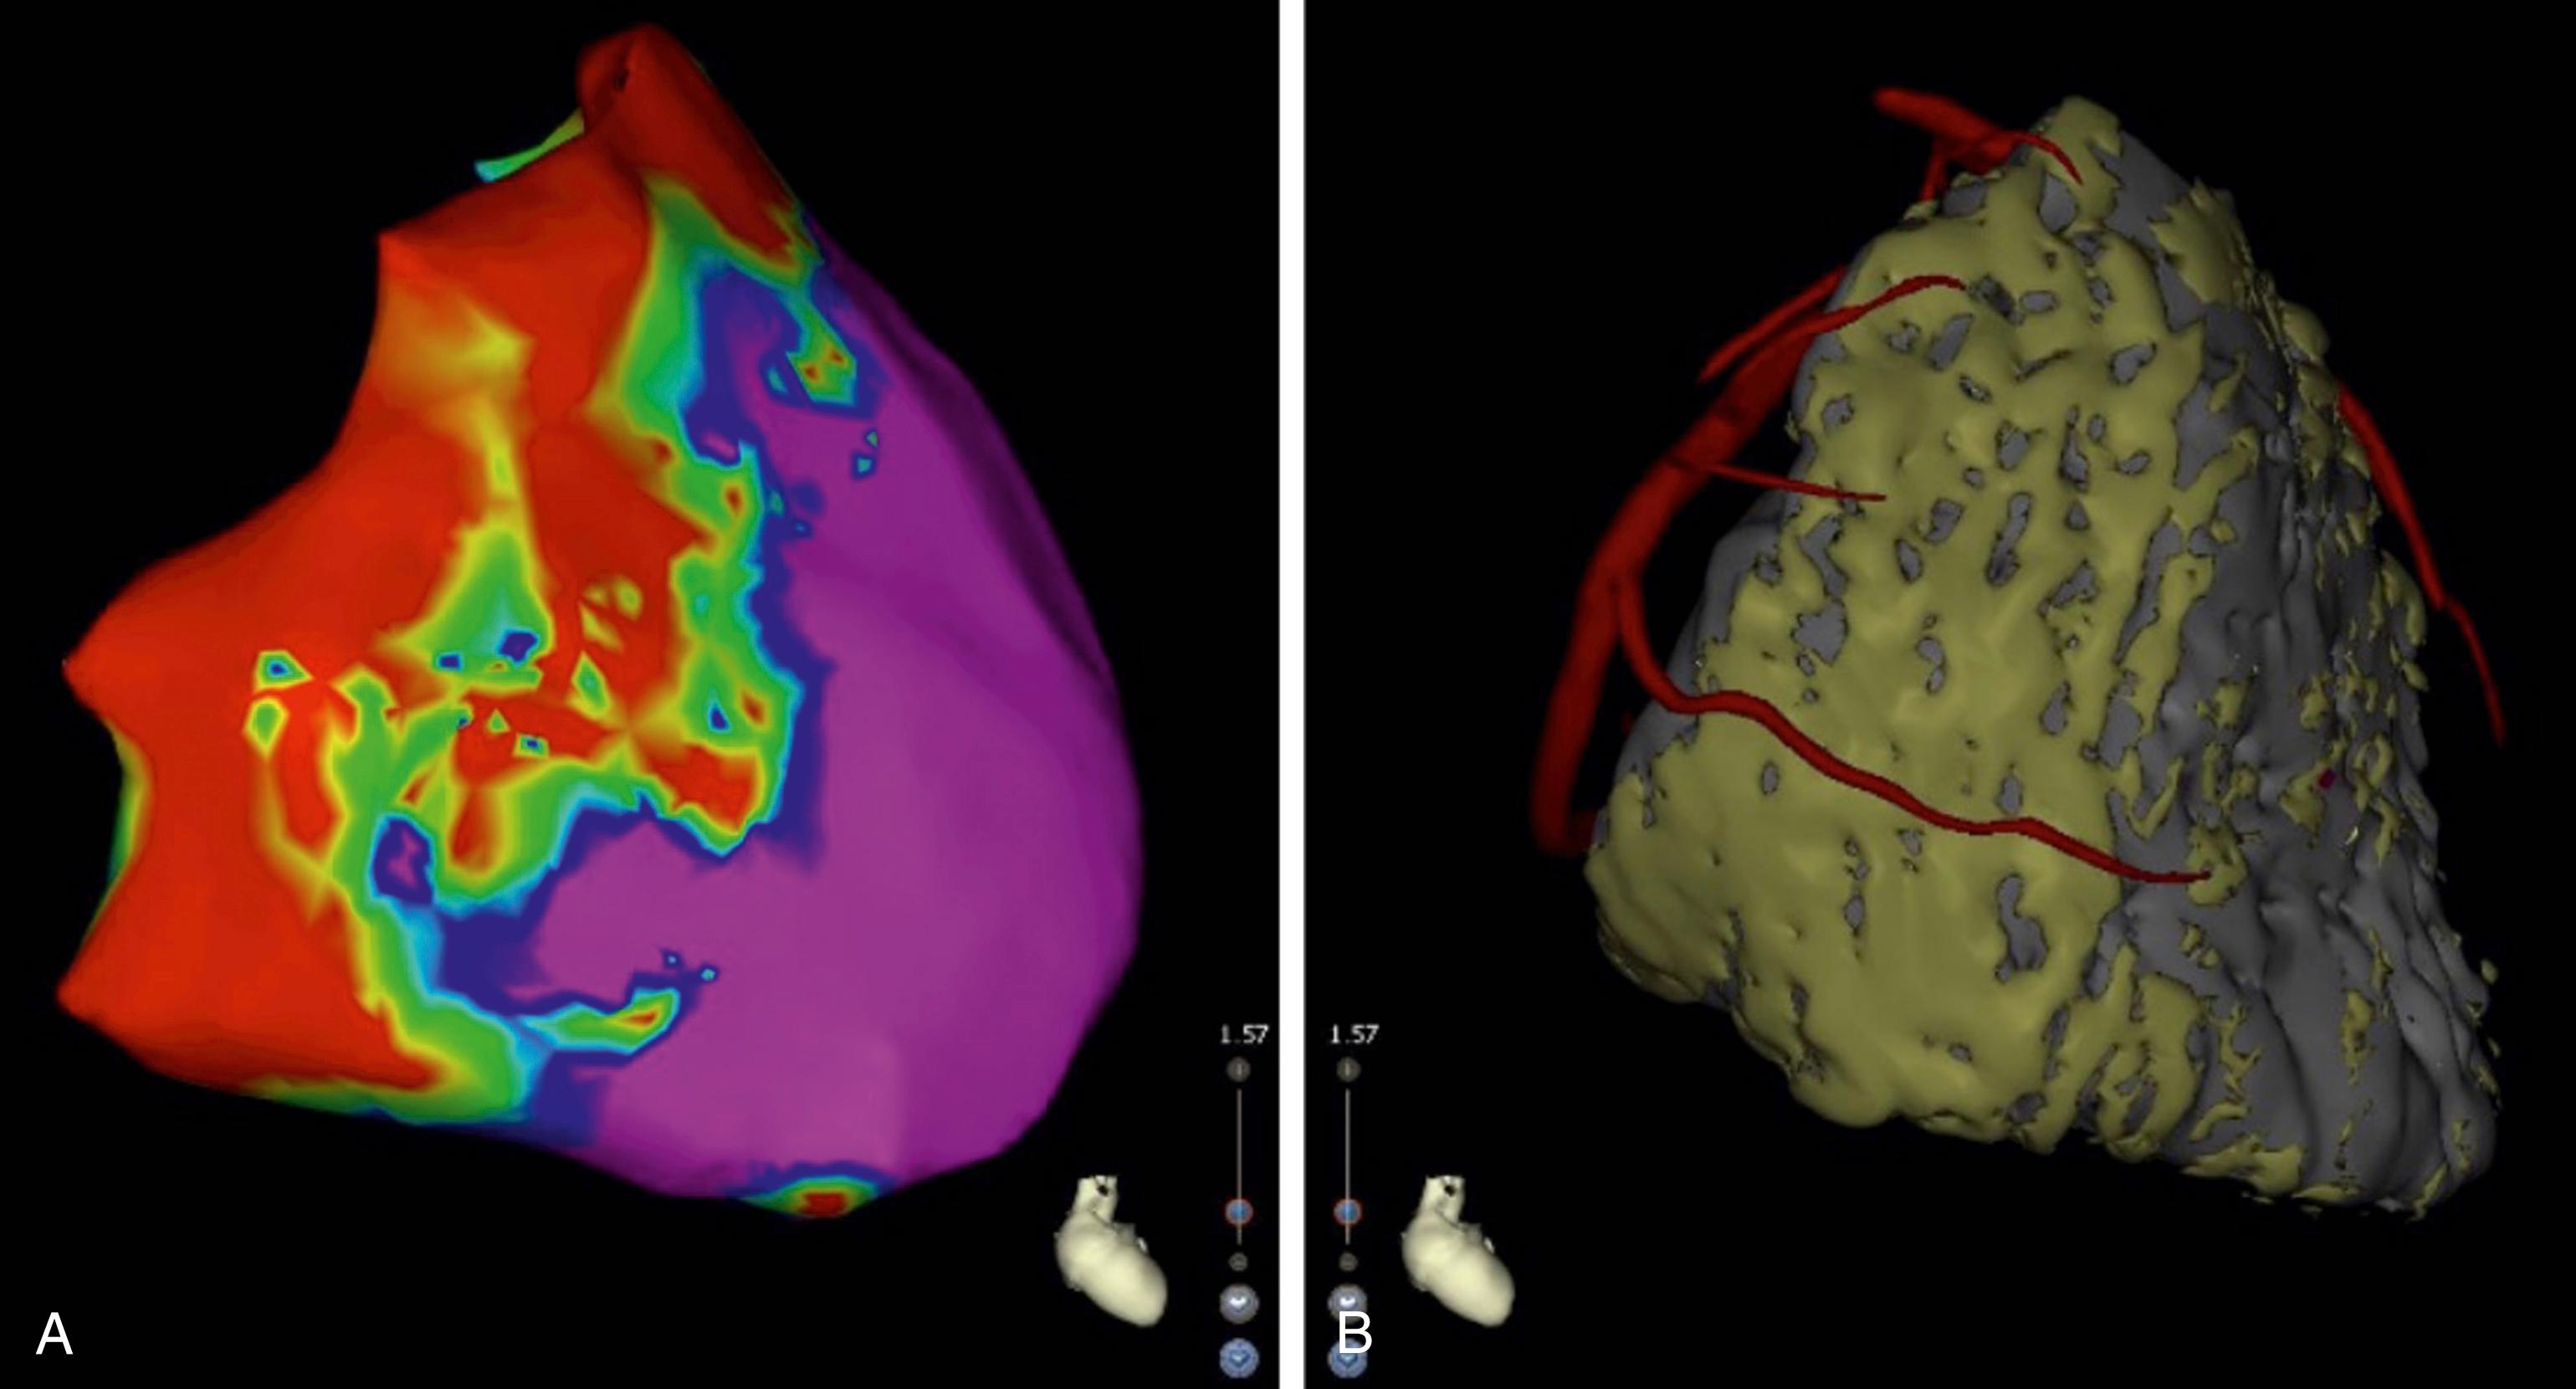 Fig. 134.4, (A) Typical arrhythmogenic right ventricular cardiomyopathy voltage map with basal and latero-tricuspid annulus scar ( red , yellow, green ) well correlated to the fat on computed tomography scan imaging (B).